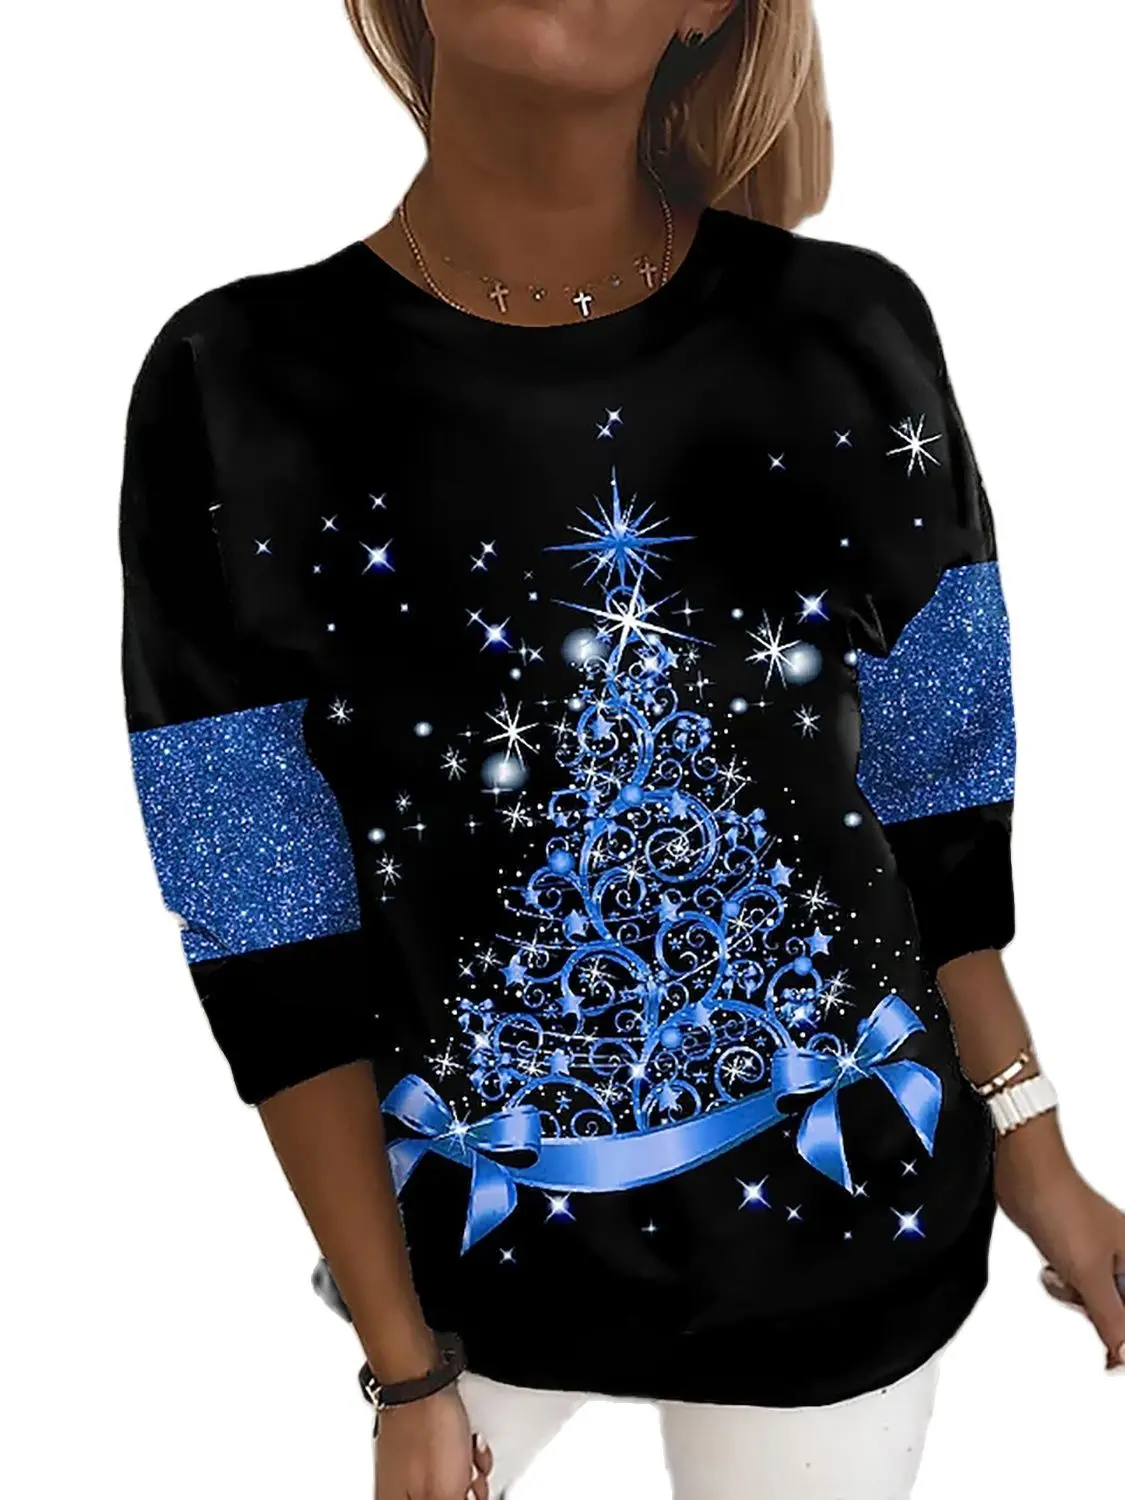 

Snowflake Sparkly T-shirt Women Tees Christmas Tree Christmas Weekend Painting Tee Long Sleeve Print Round Neck Basic XS-8XL y2k